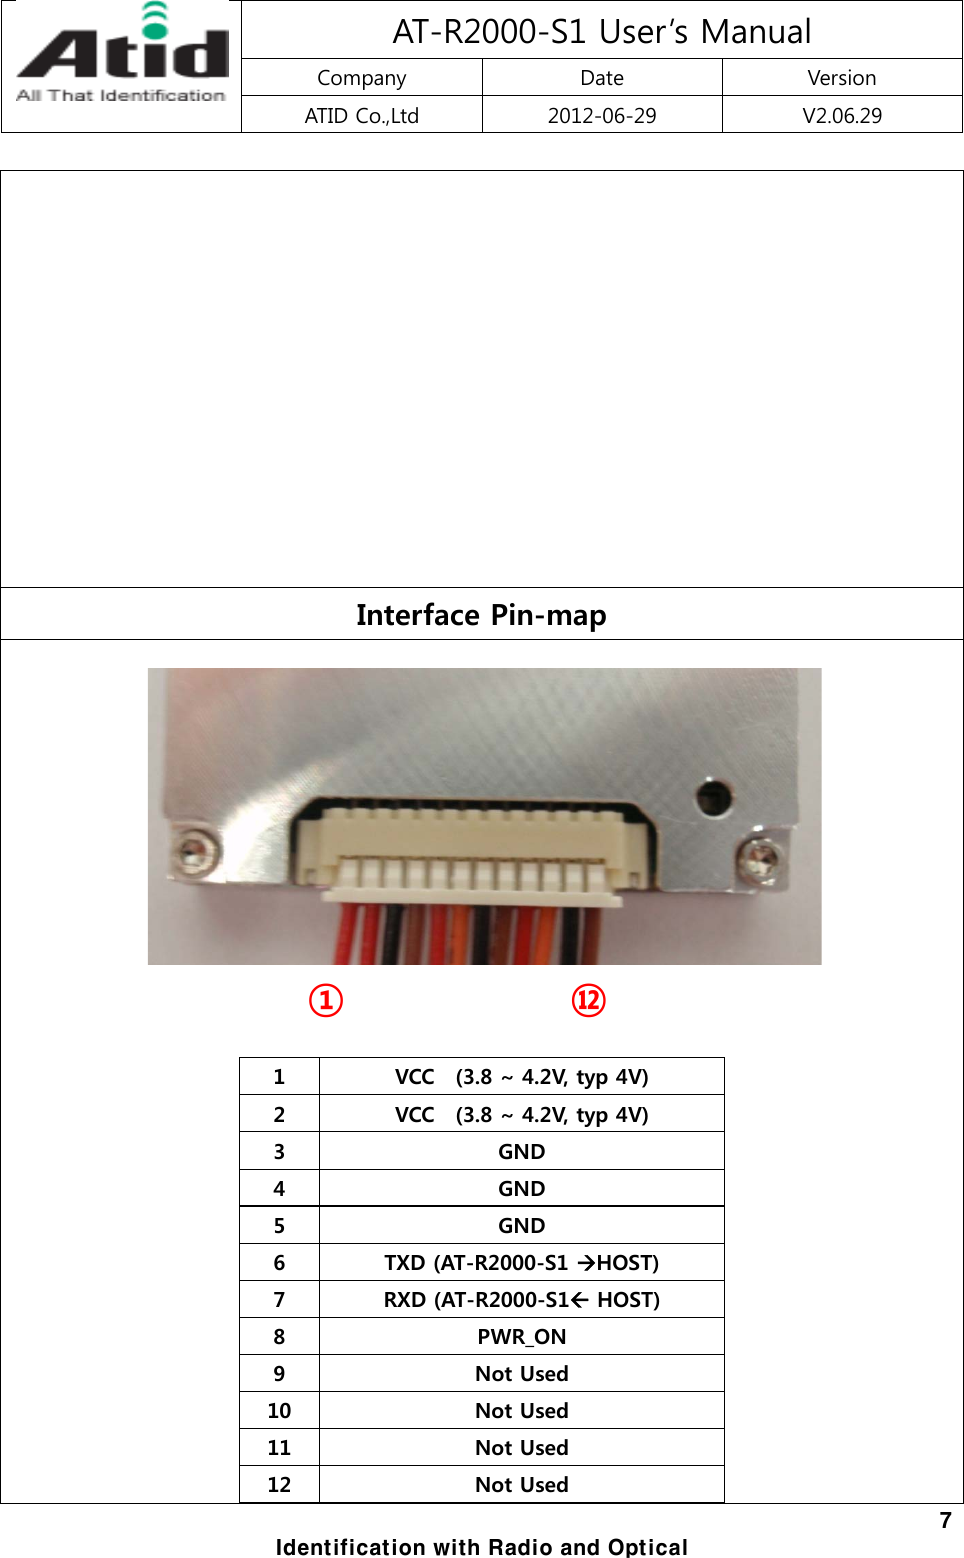 AT-R2000-S1 User’s Manual Company  Date  Version ATID Co.,Ltd  2012-06-29  V2.06.29  7 Identification with Radio and Optical       Interface Pin-map      ①            ⑫  1  VCC   (3.8 ~ 4.2V, typ 4V) 2  VCC   (3.8 ~ 4.2V, typ 4V) 3  GND 4  GND 5  GND 6  TXD (AT-R2000-S1 HOST) 7  RXD (AT-R2000-S1 HOST) 8  PWR_ON 9  Not Used 10  Not Used 11  Not Used 12  Not Used  